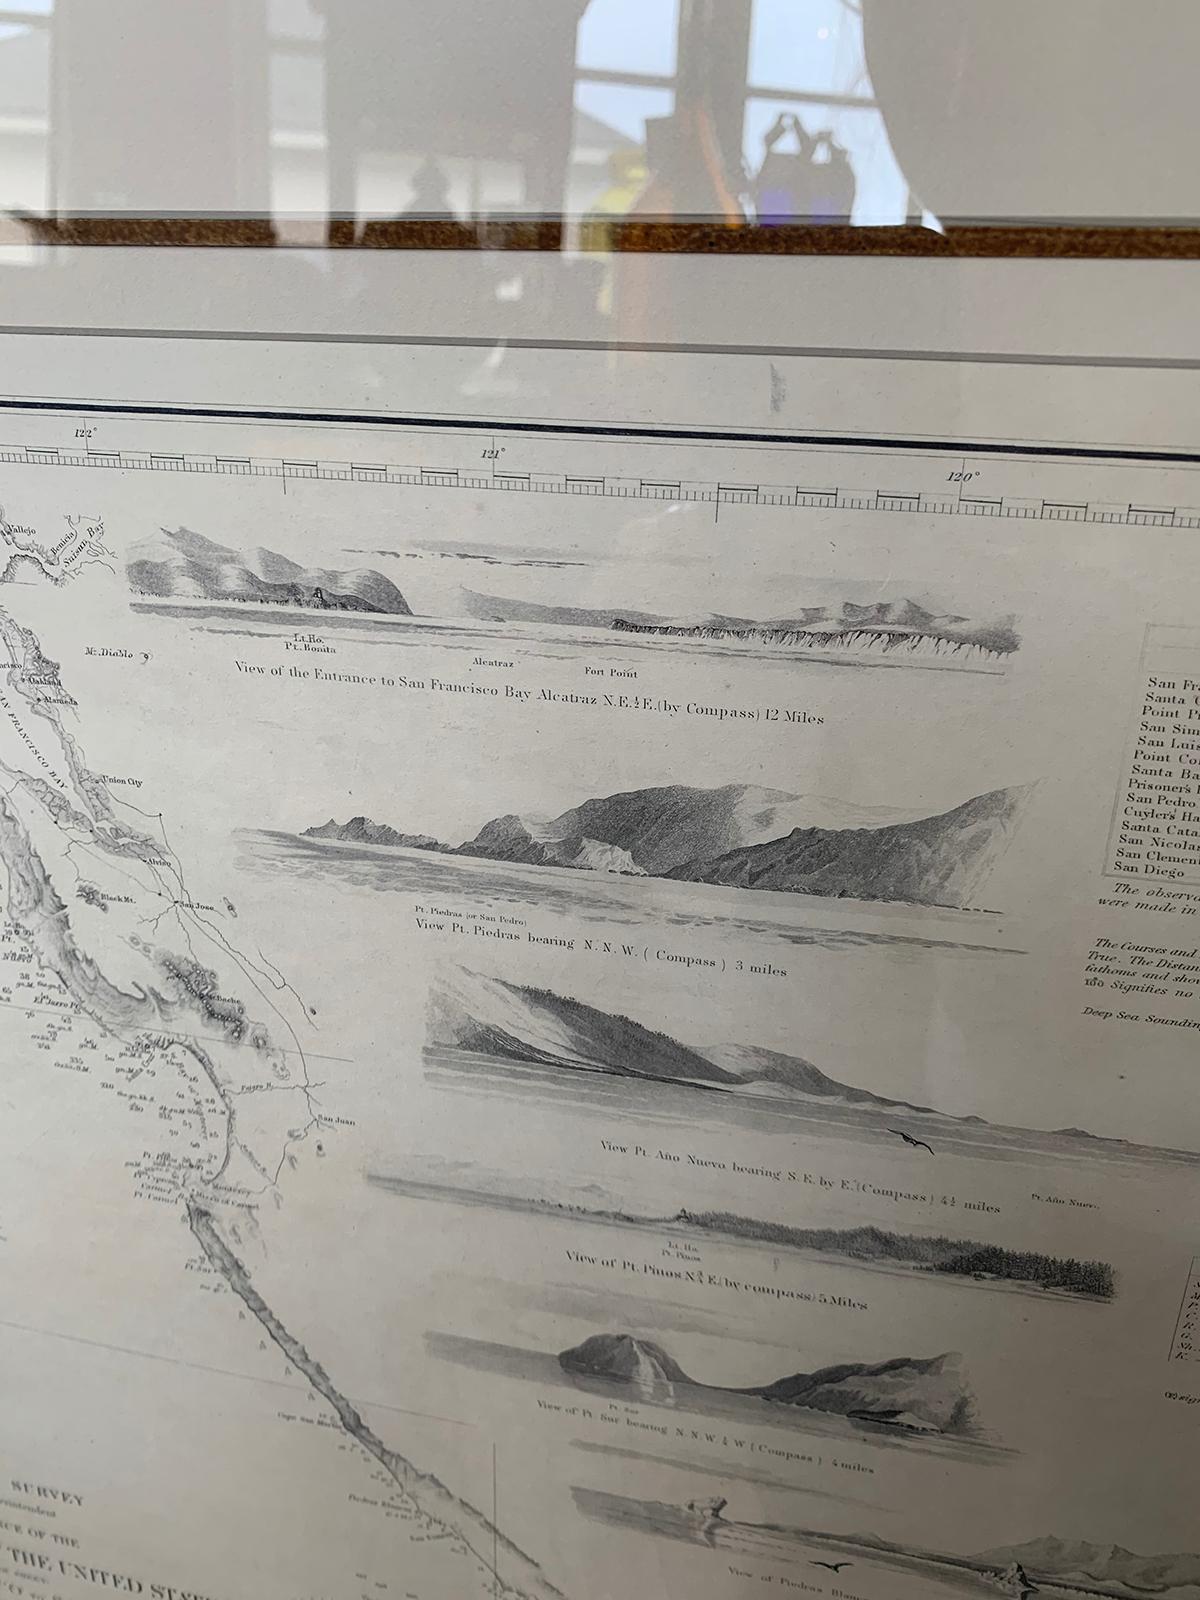 Paper Print of Reconnaissance of the West Coast of U.S. San Francisco to San Diego Map